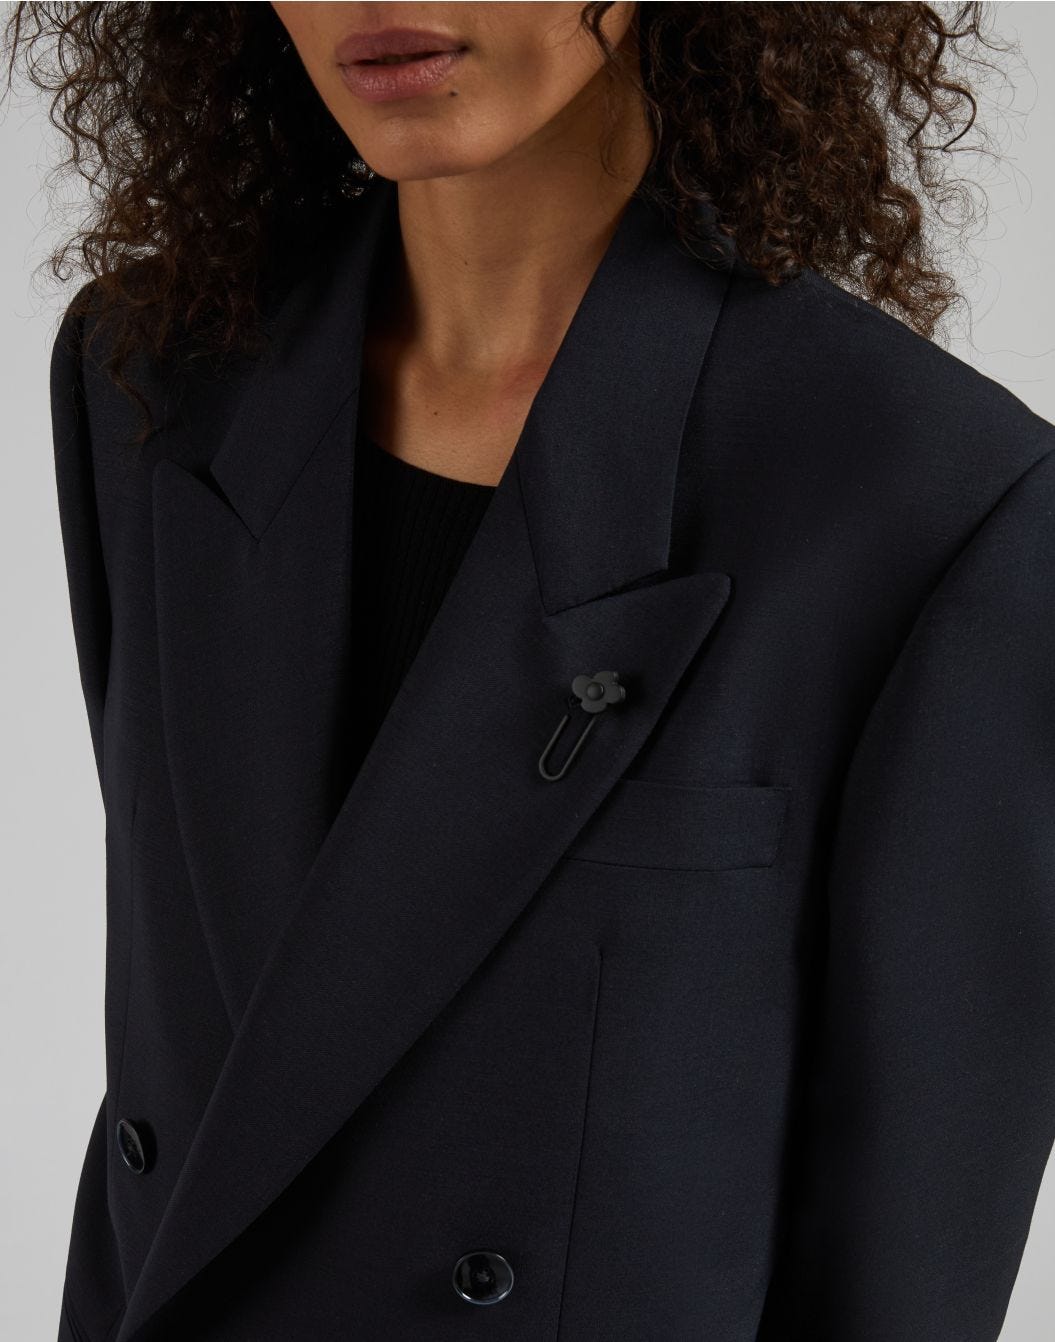 Blue double-breasted jacket lined with wool fabric